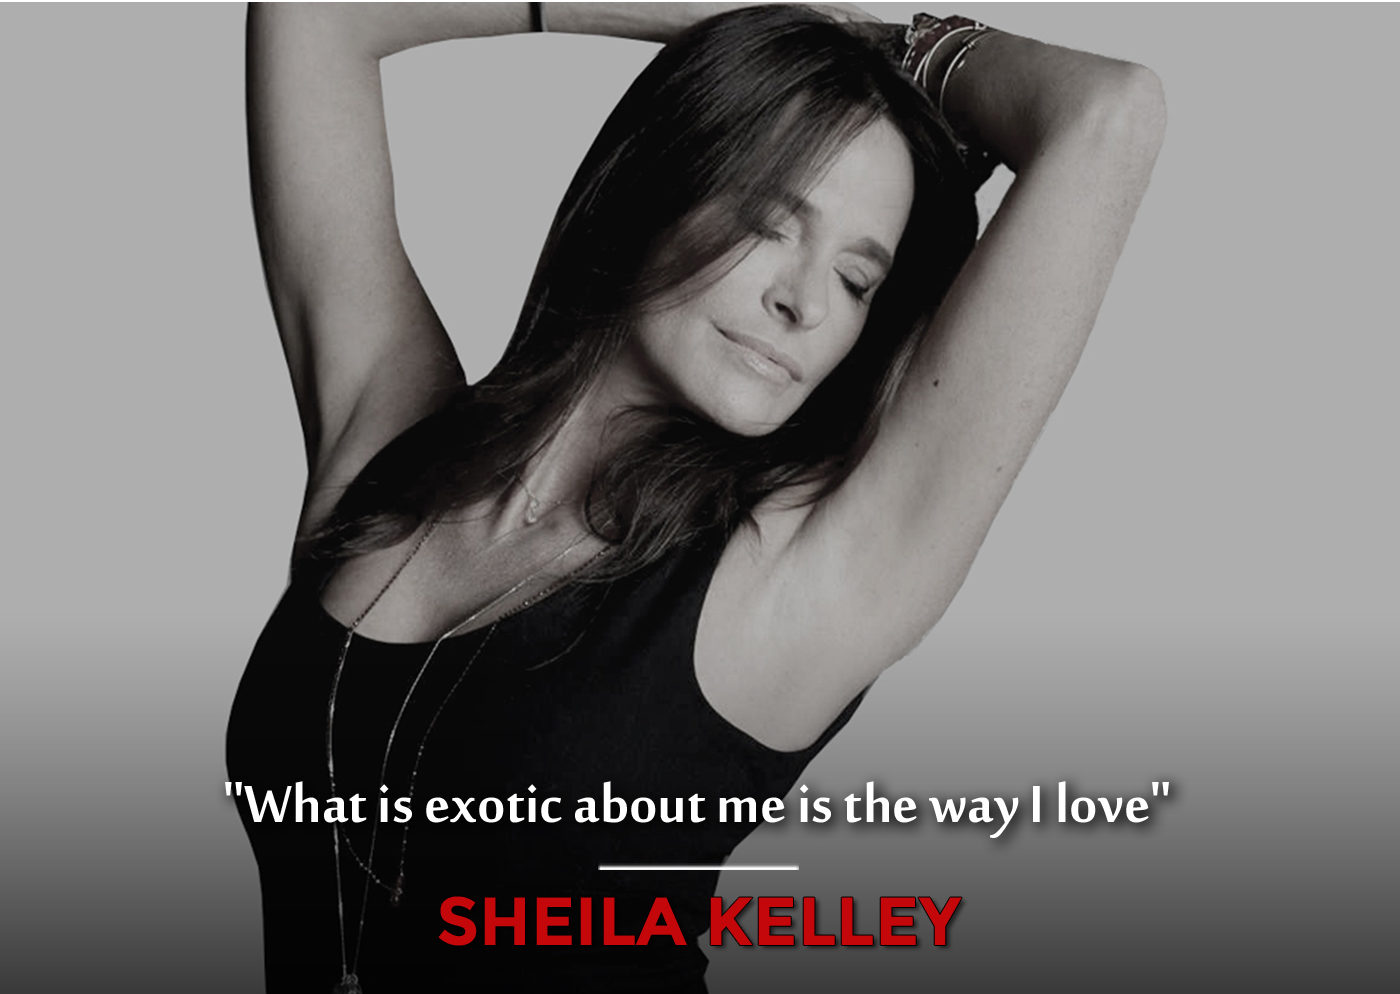 Hot sheila kelley You’re Old!